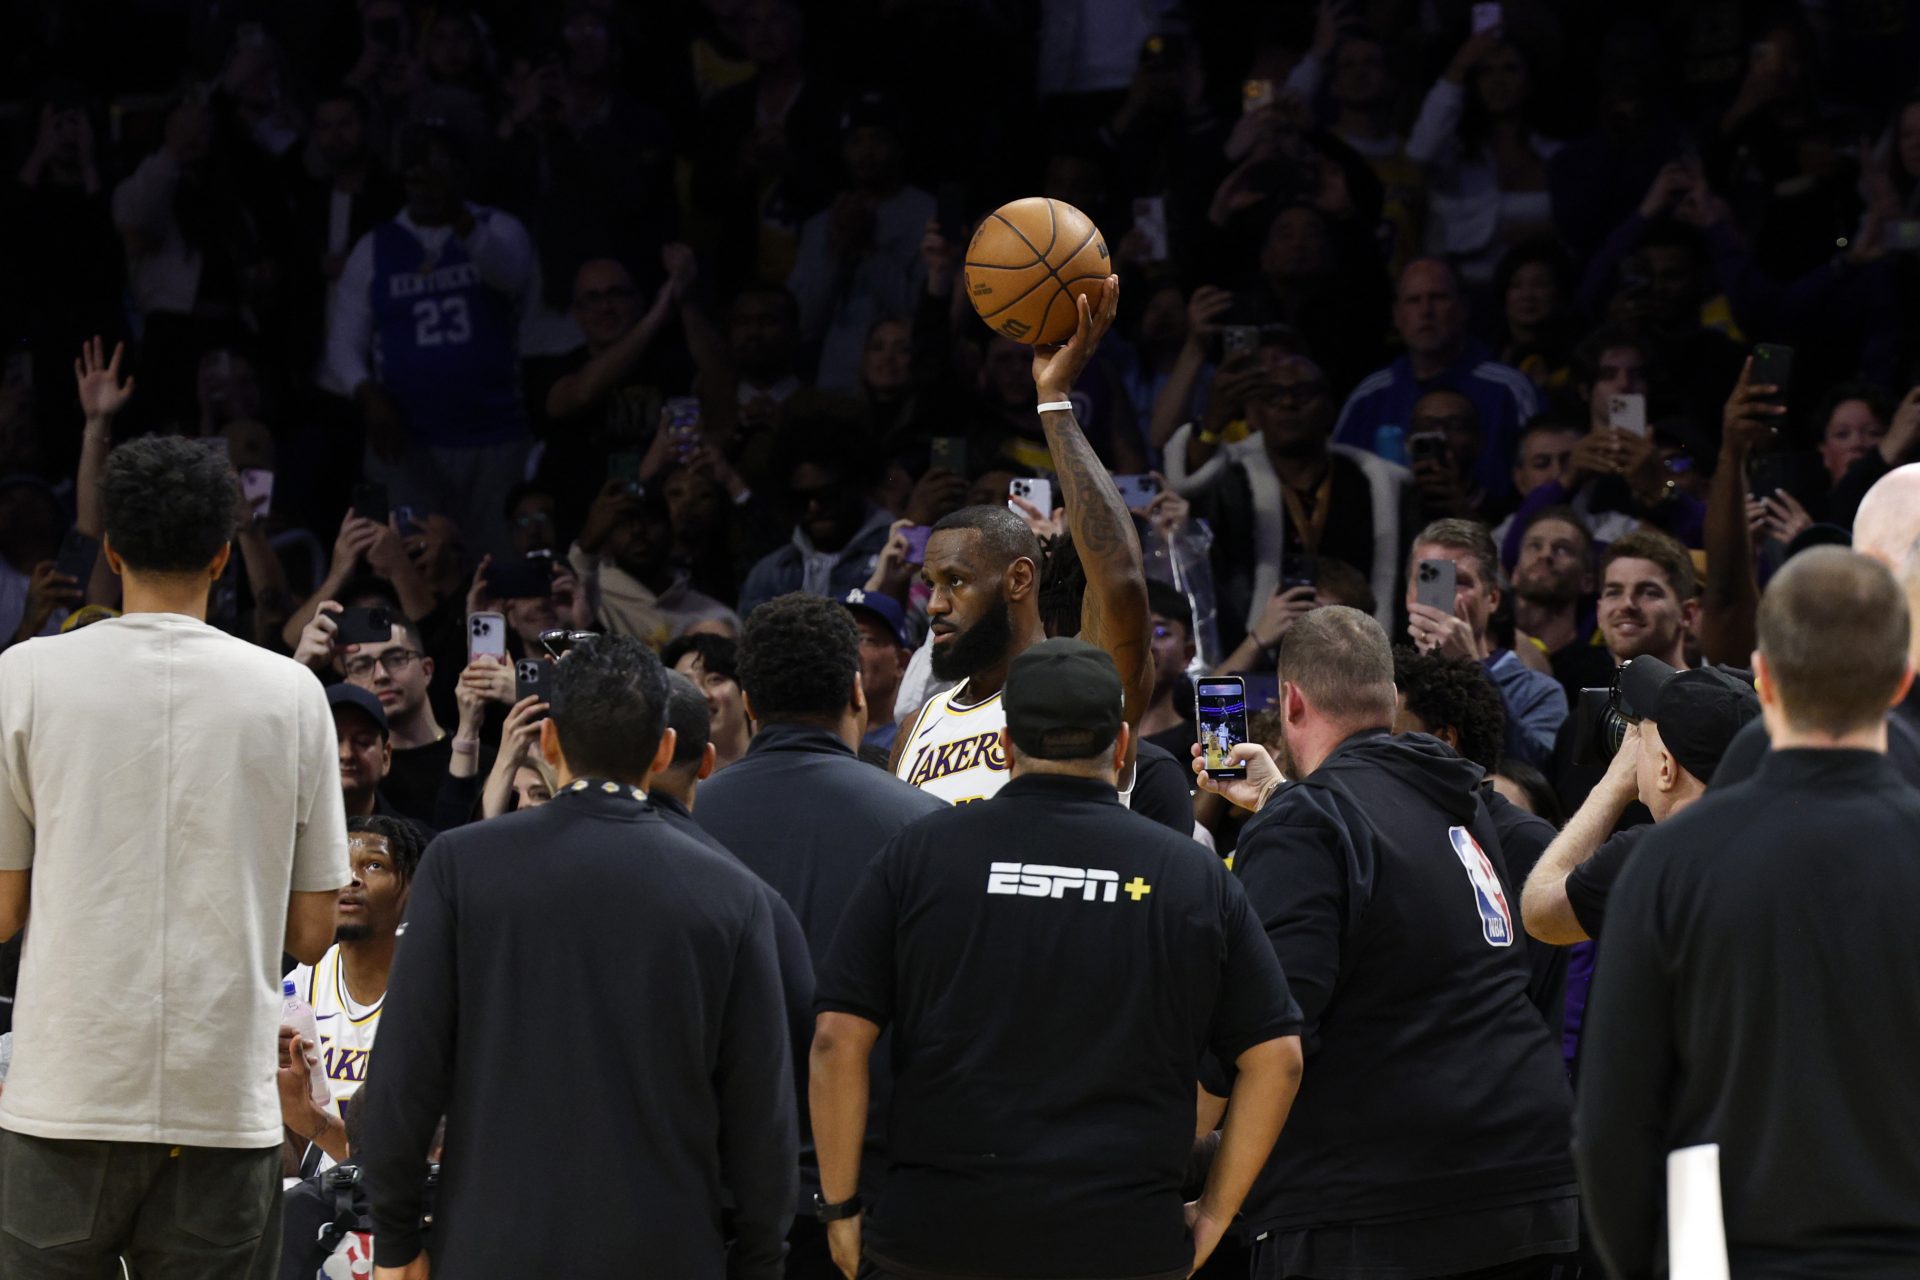 GOAT LeBron James becomes the first player to score 40,000 NBA points